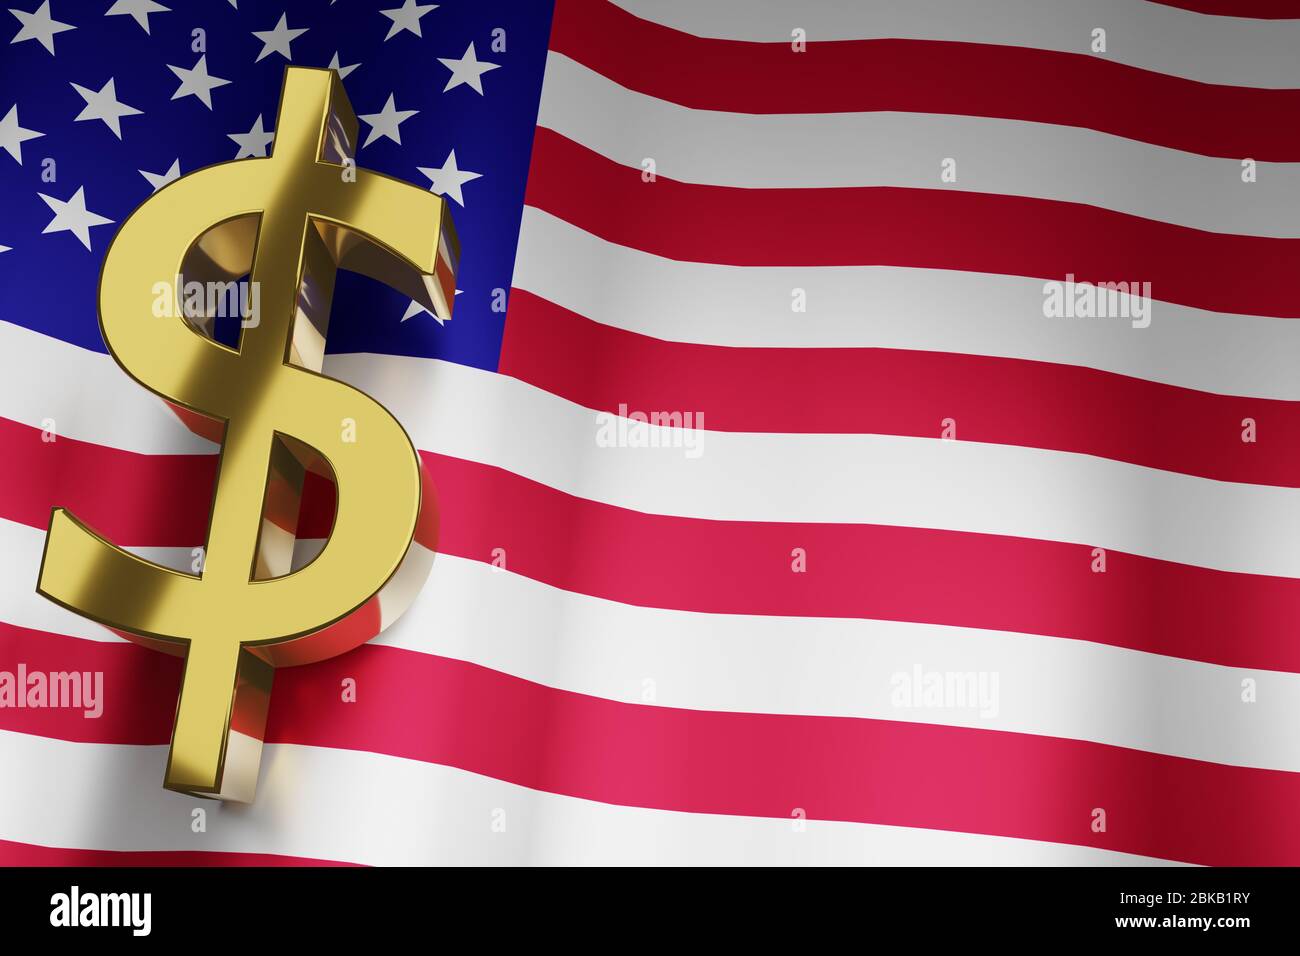 USD US Dollar Currency Sign with USA National Flag background for Business Financial, 3D Rendering with copy space. Stock Photo